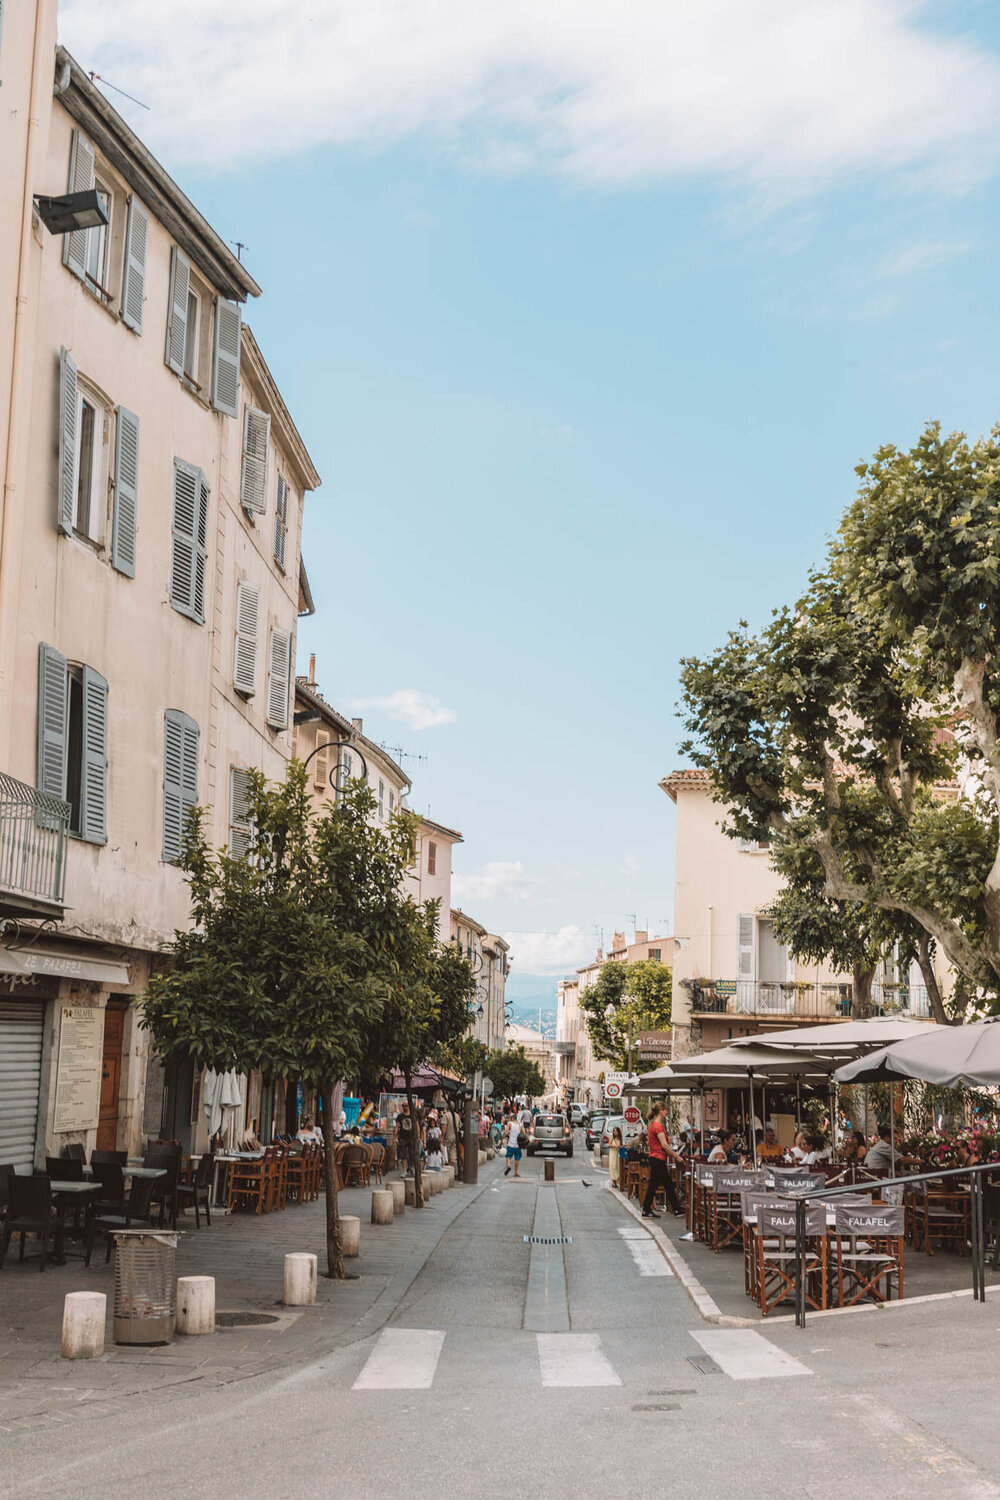 Things to do in Antibes France on a day trip: Antibes Beaches, Old Town, South of France, Cote d'Azur, French Riviera, Antibes Photography, Antibes Pictures, Antibes Market, Antibes Restaurants